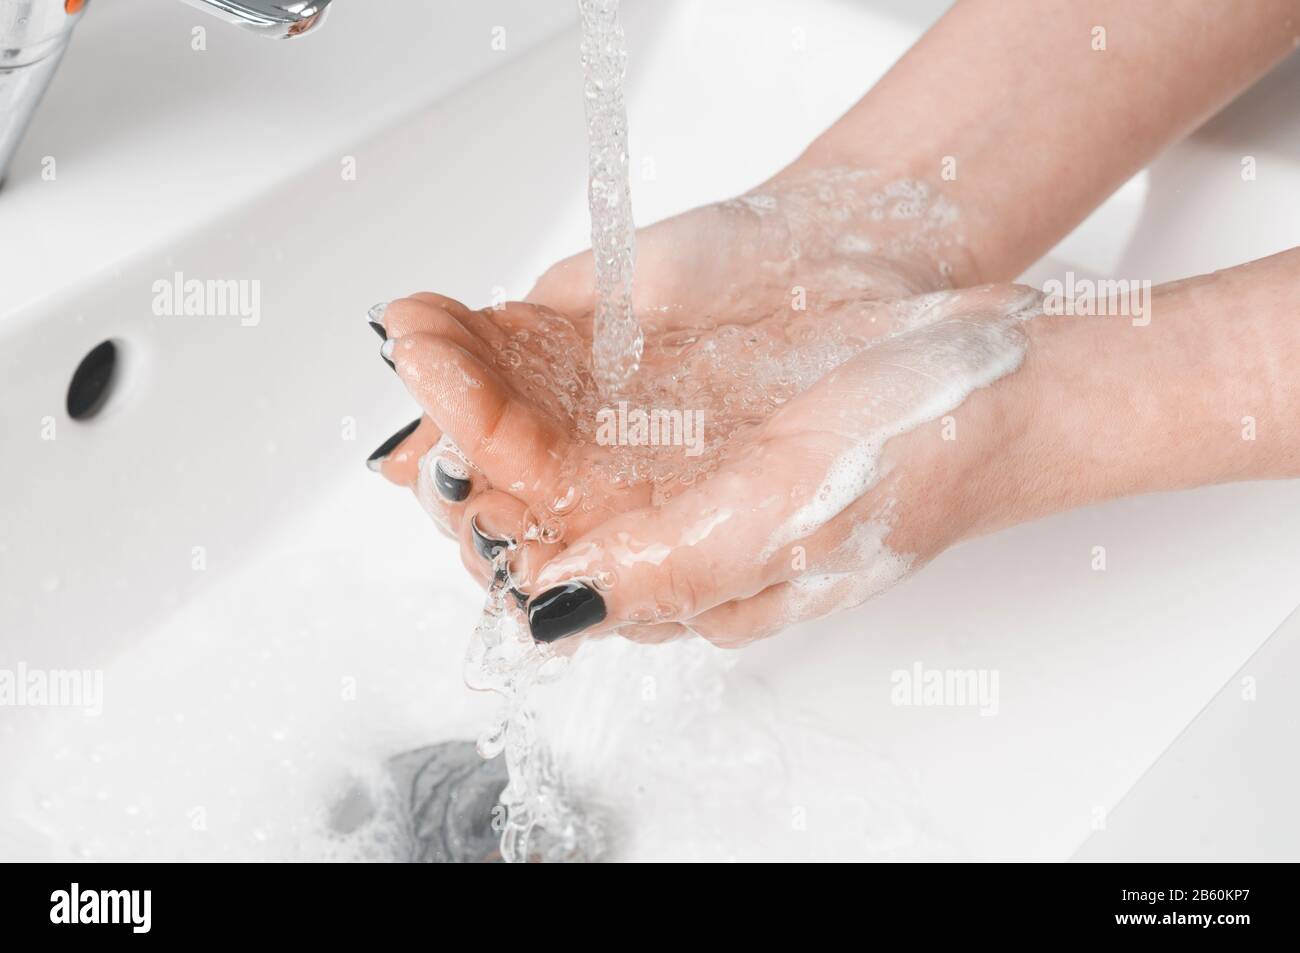 Effective handwashing techniques: woman rinse hand with water. Hand washing is very important to avoid the risk of contagion from coronavirus and bact Stock Photo